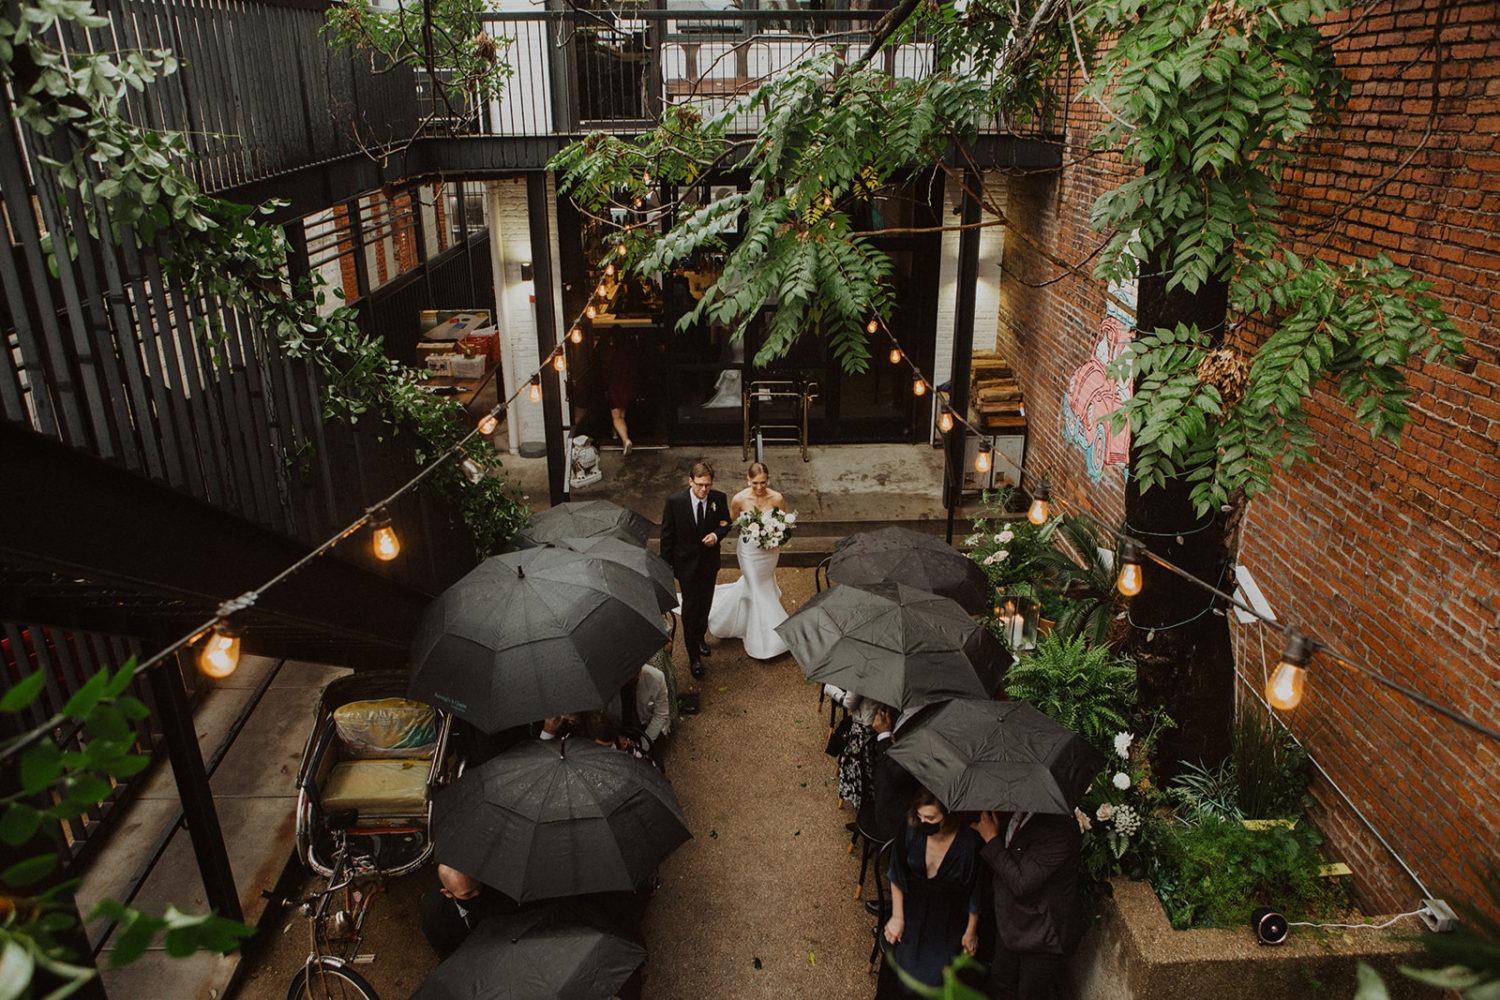 Backyard ceremony at Maketto restaurant: one of the best wedding venues in dc